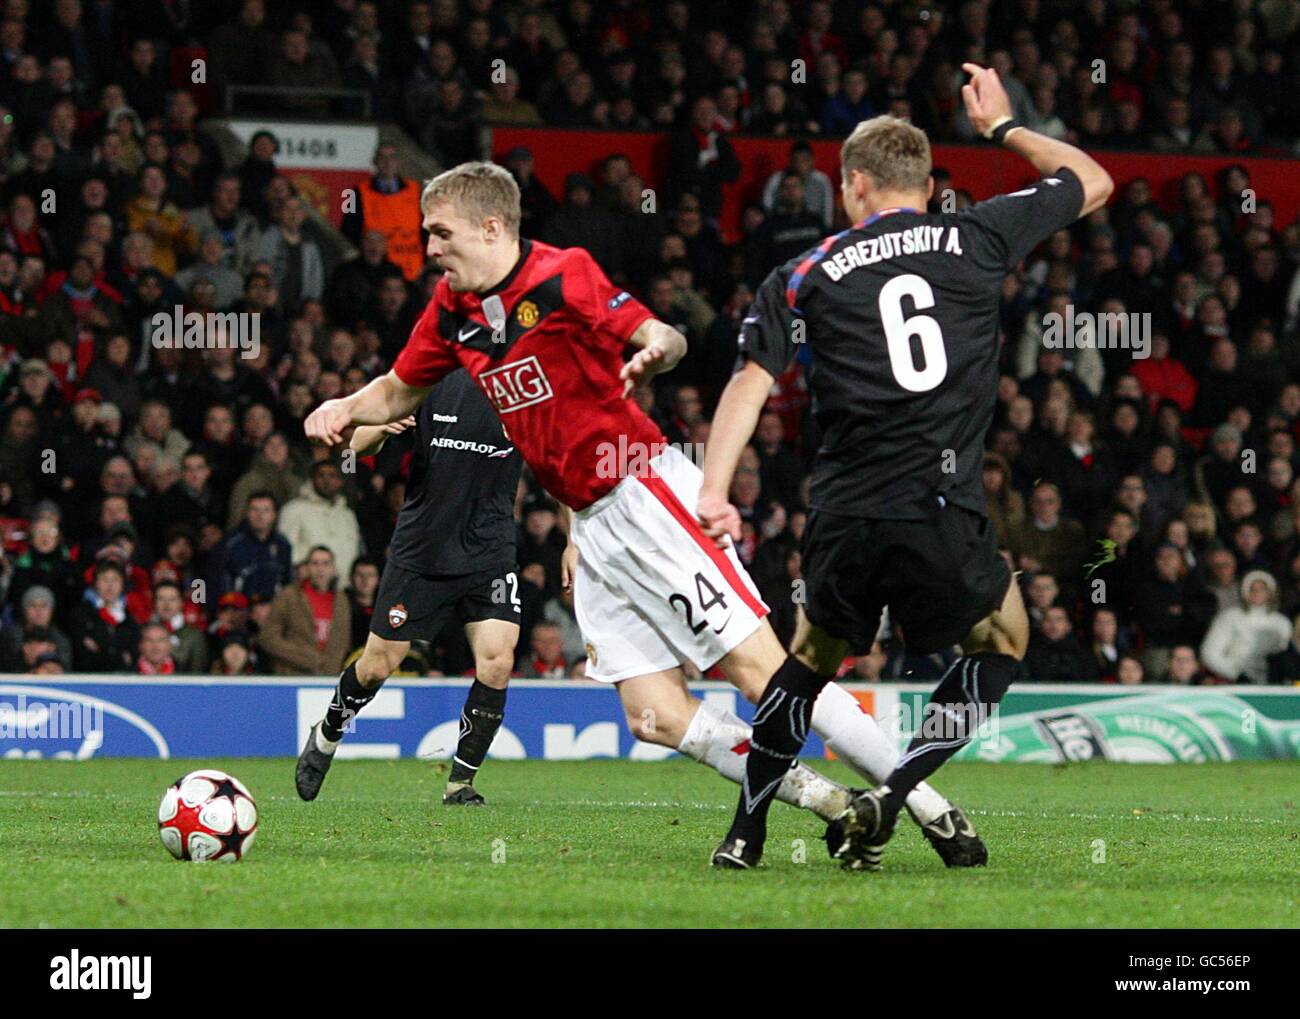 Manchester United's Darren Fletcher goes down in the penalty area after the challenge from CSKA Moscow's Alexei Berezutsky for which he receives a yellow card for diving Stock Photo